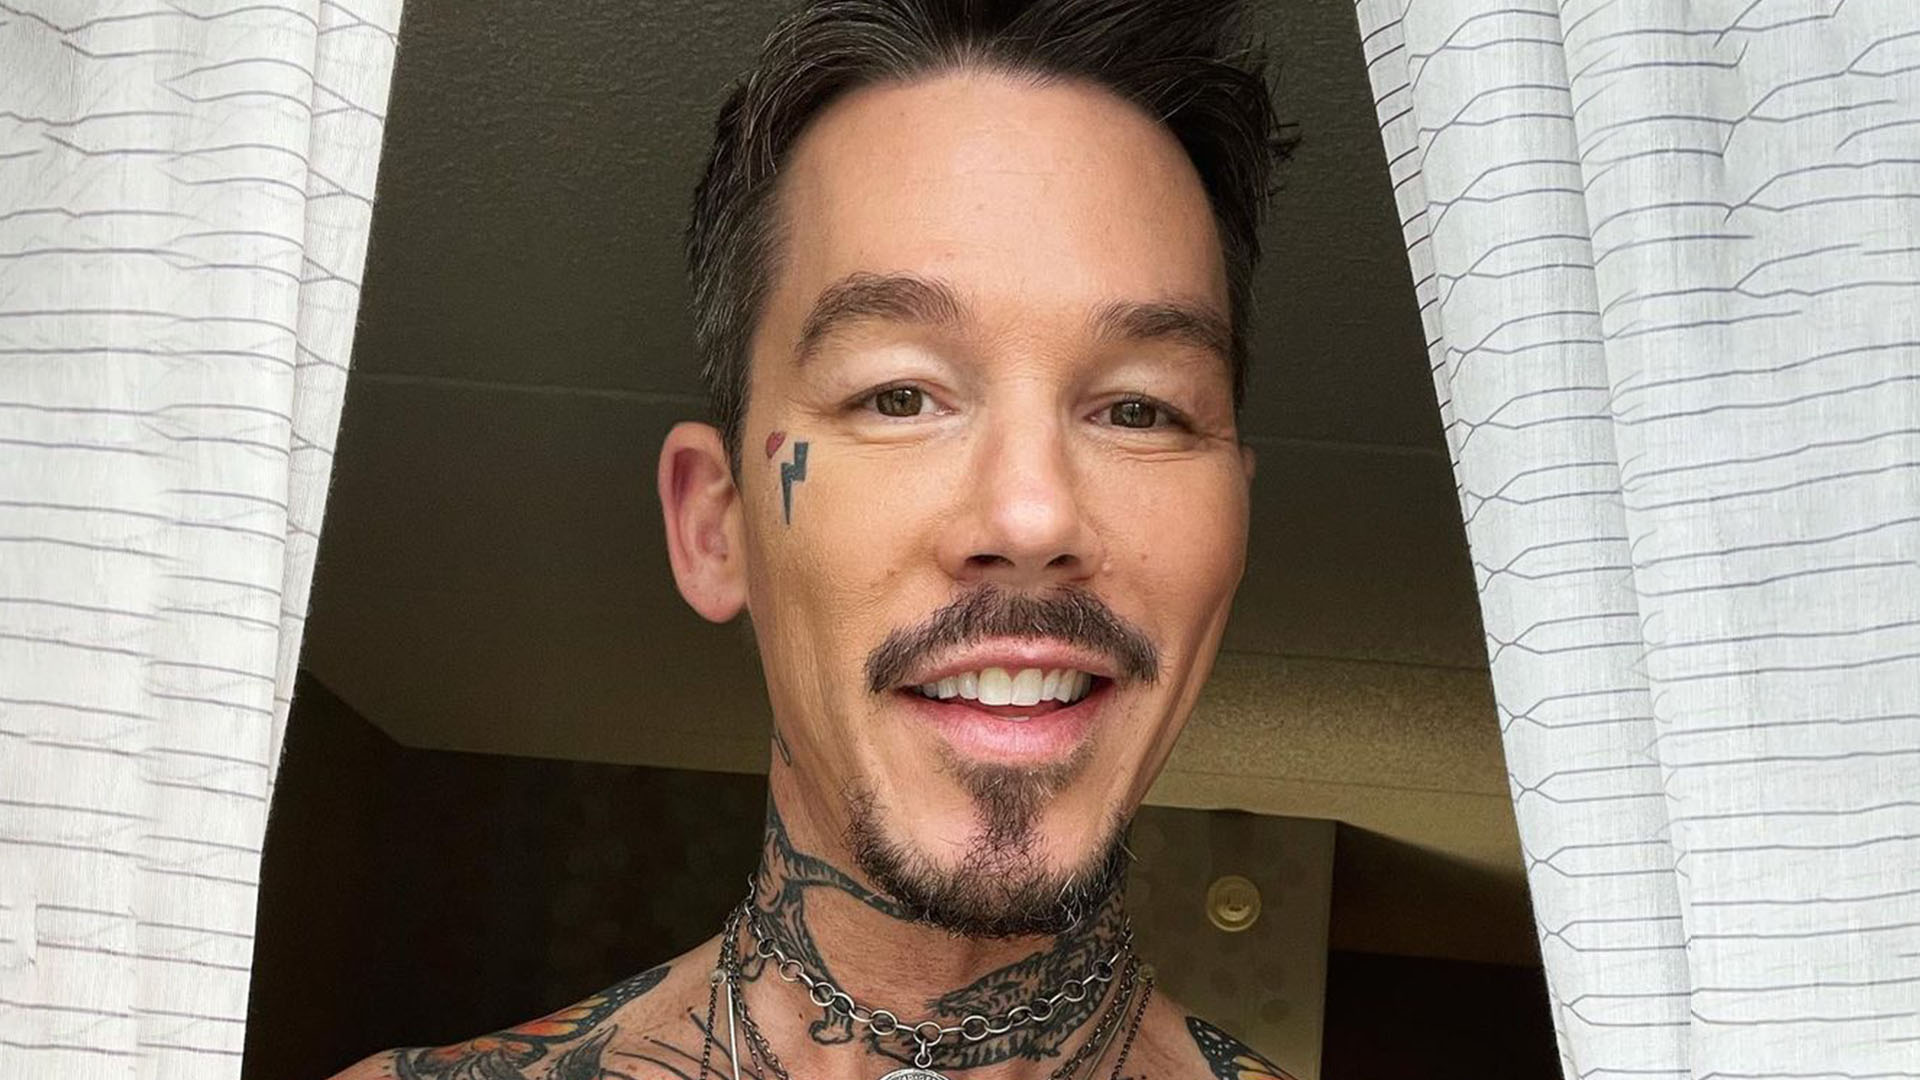 What tattoos does David Bromstad have? The US Sun